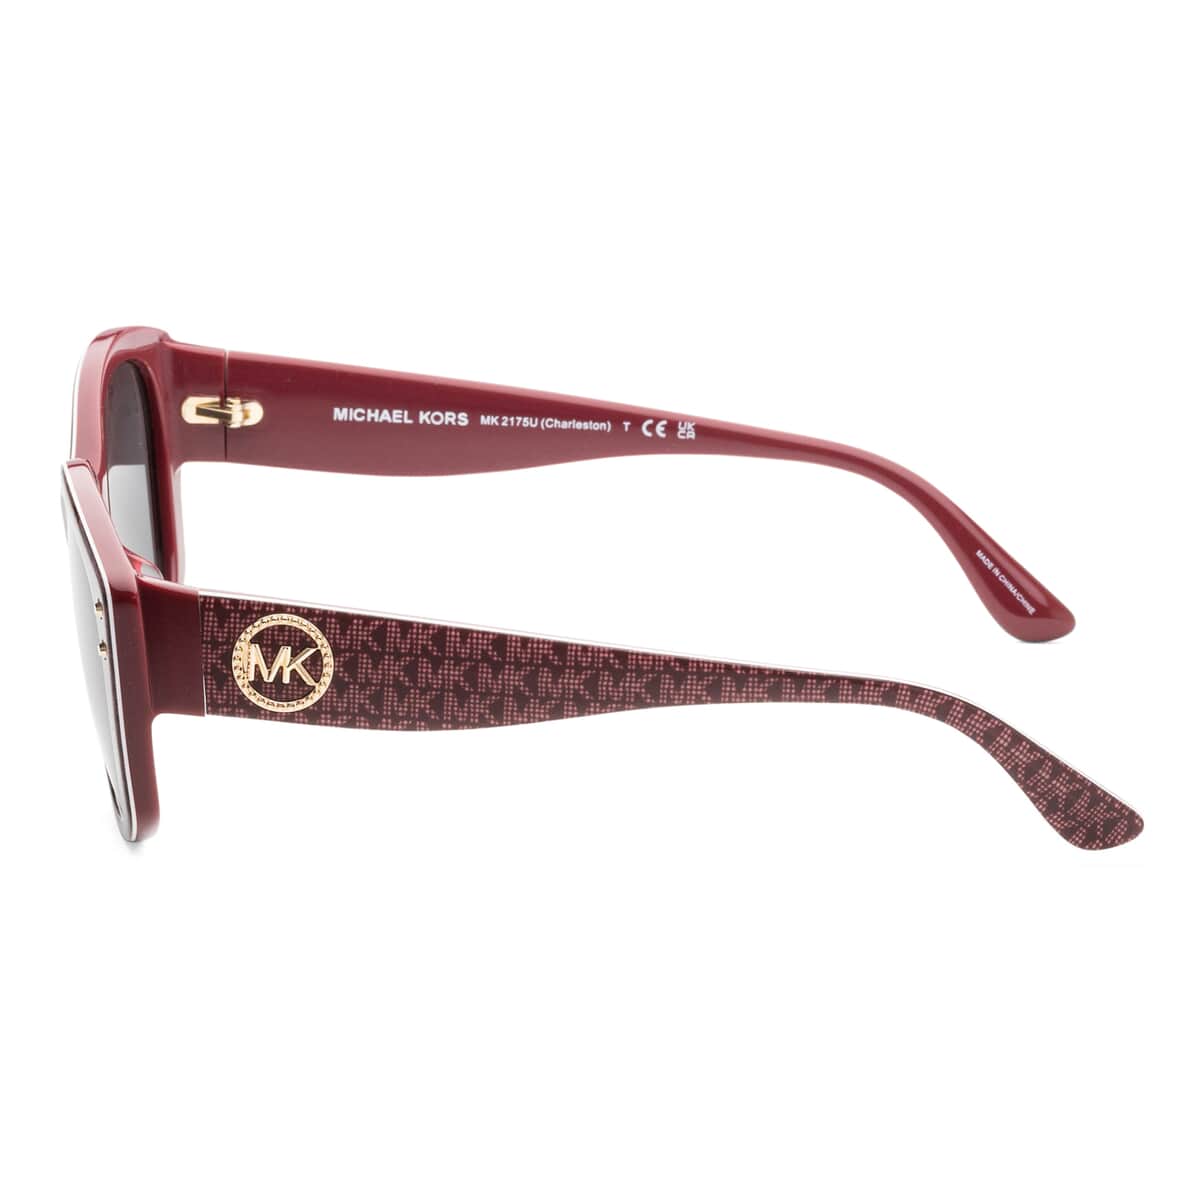 Michael Kors Women's Merlot Fashion Sunglasses with Protection Case image number 1